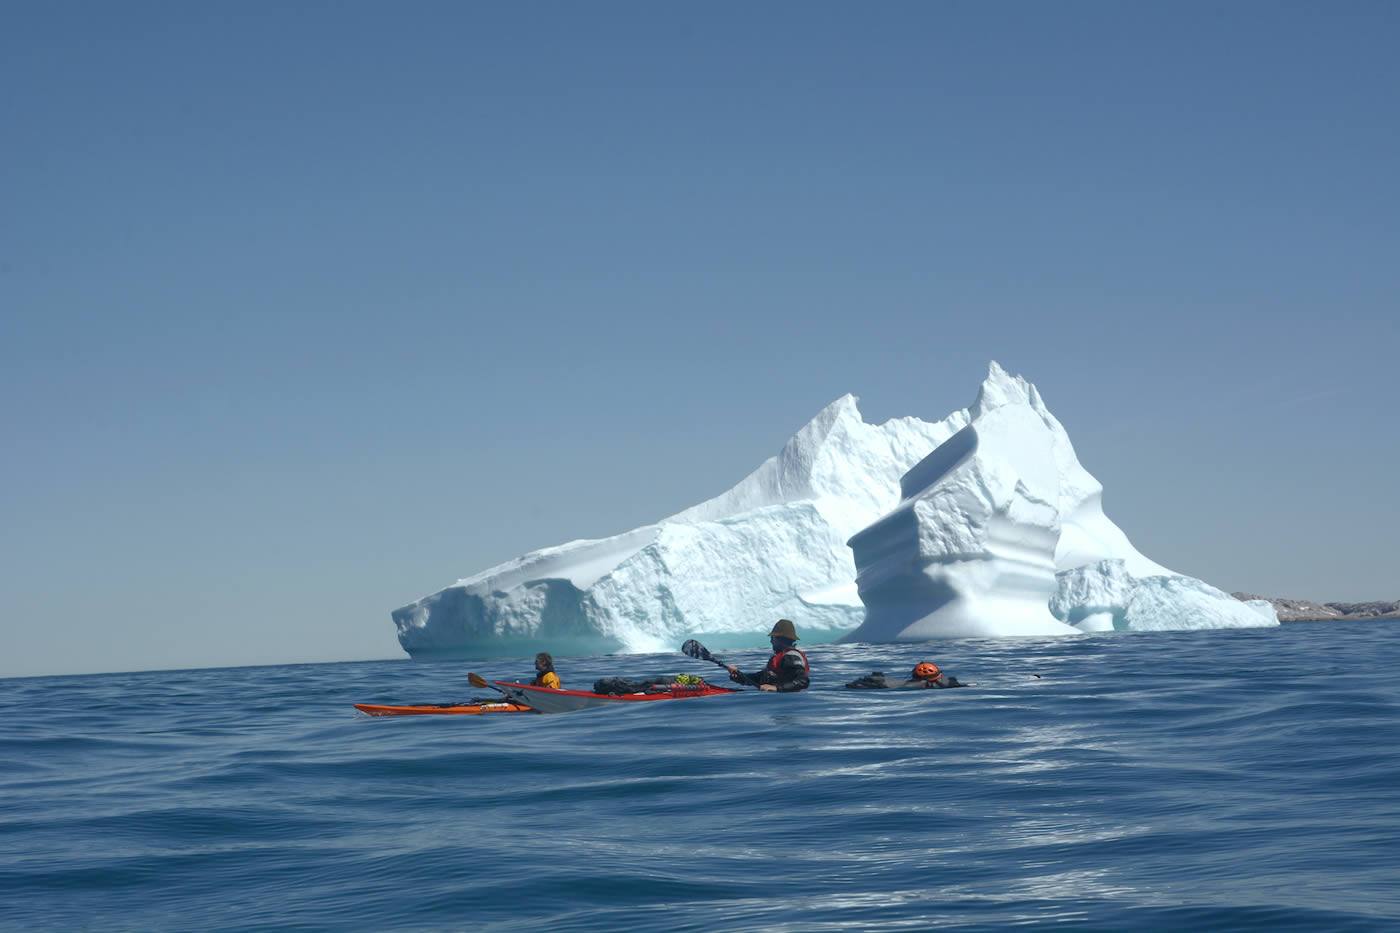 Antoine Moineville and Christian Laddy Ledergerber paddle in the North Atlantic Ocean. [Photo] Silvan Schuepbach